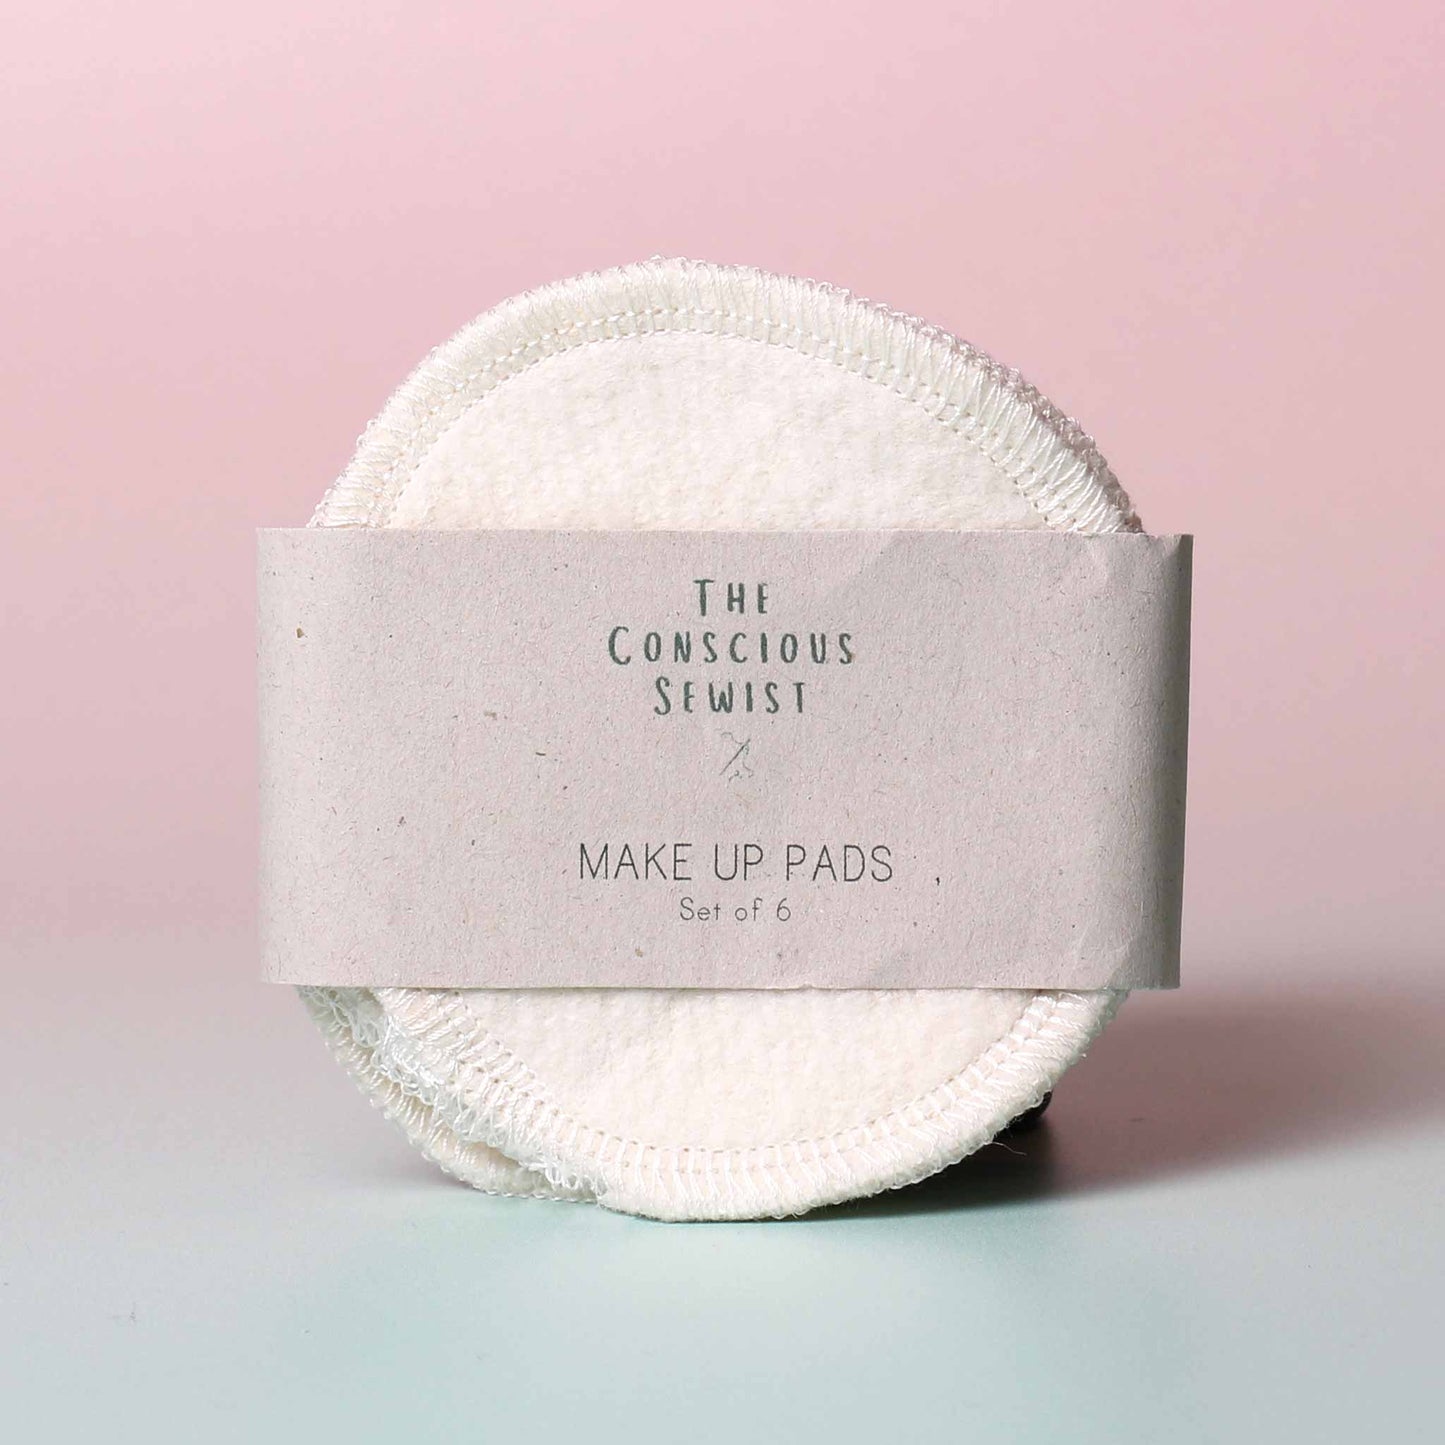 The Conscious Sewist - Make Up Pads